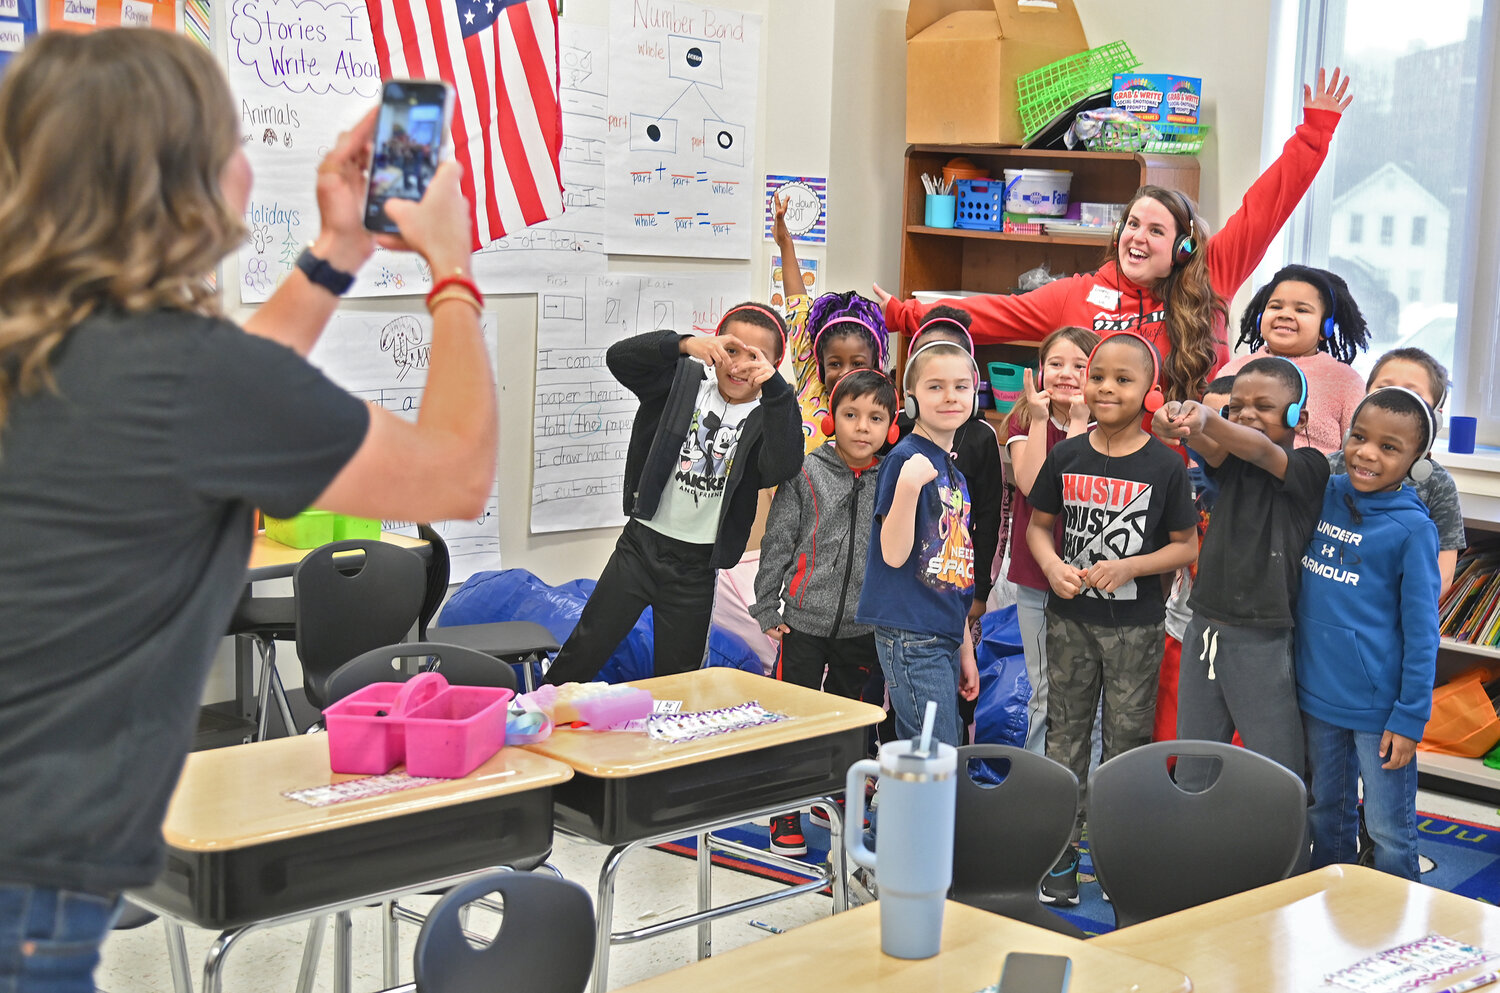 Teacher Jordyn Dunlap, left, gets a photo of Liz Ellis from Kiss FM with her class after the radio personality read a book to her class Friday, March 24 at Kernan Elementary School in Utica.